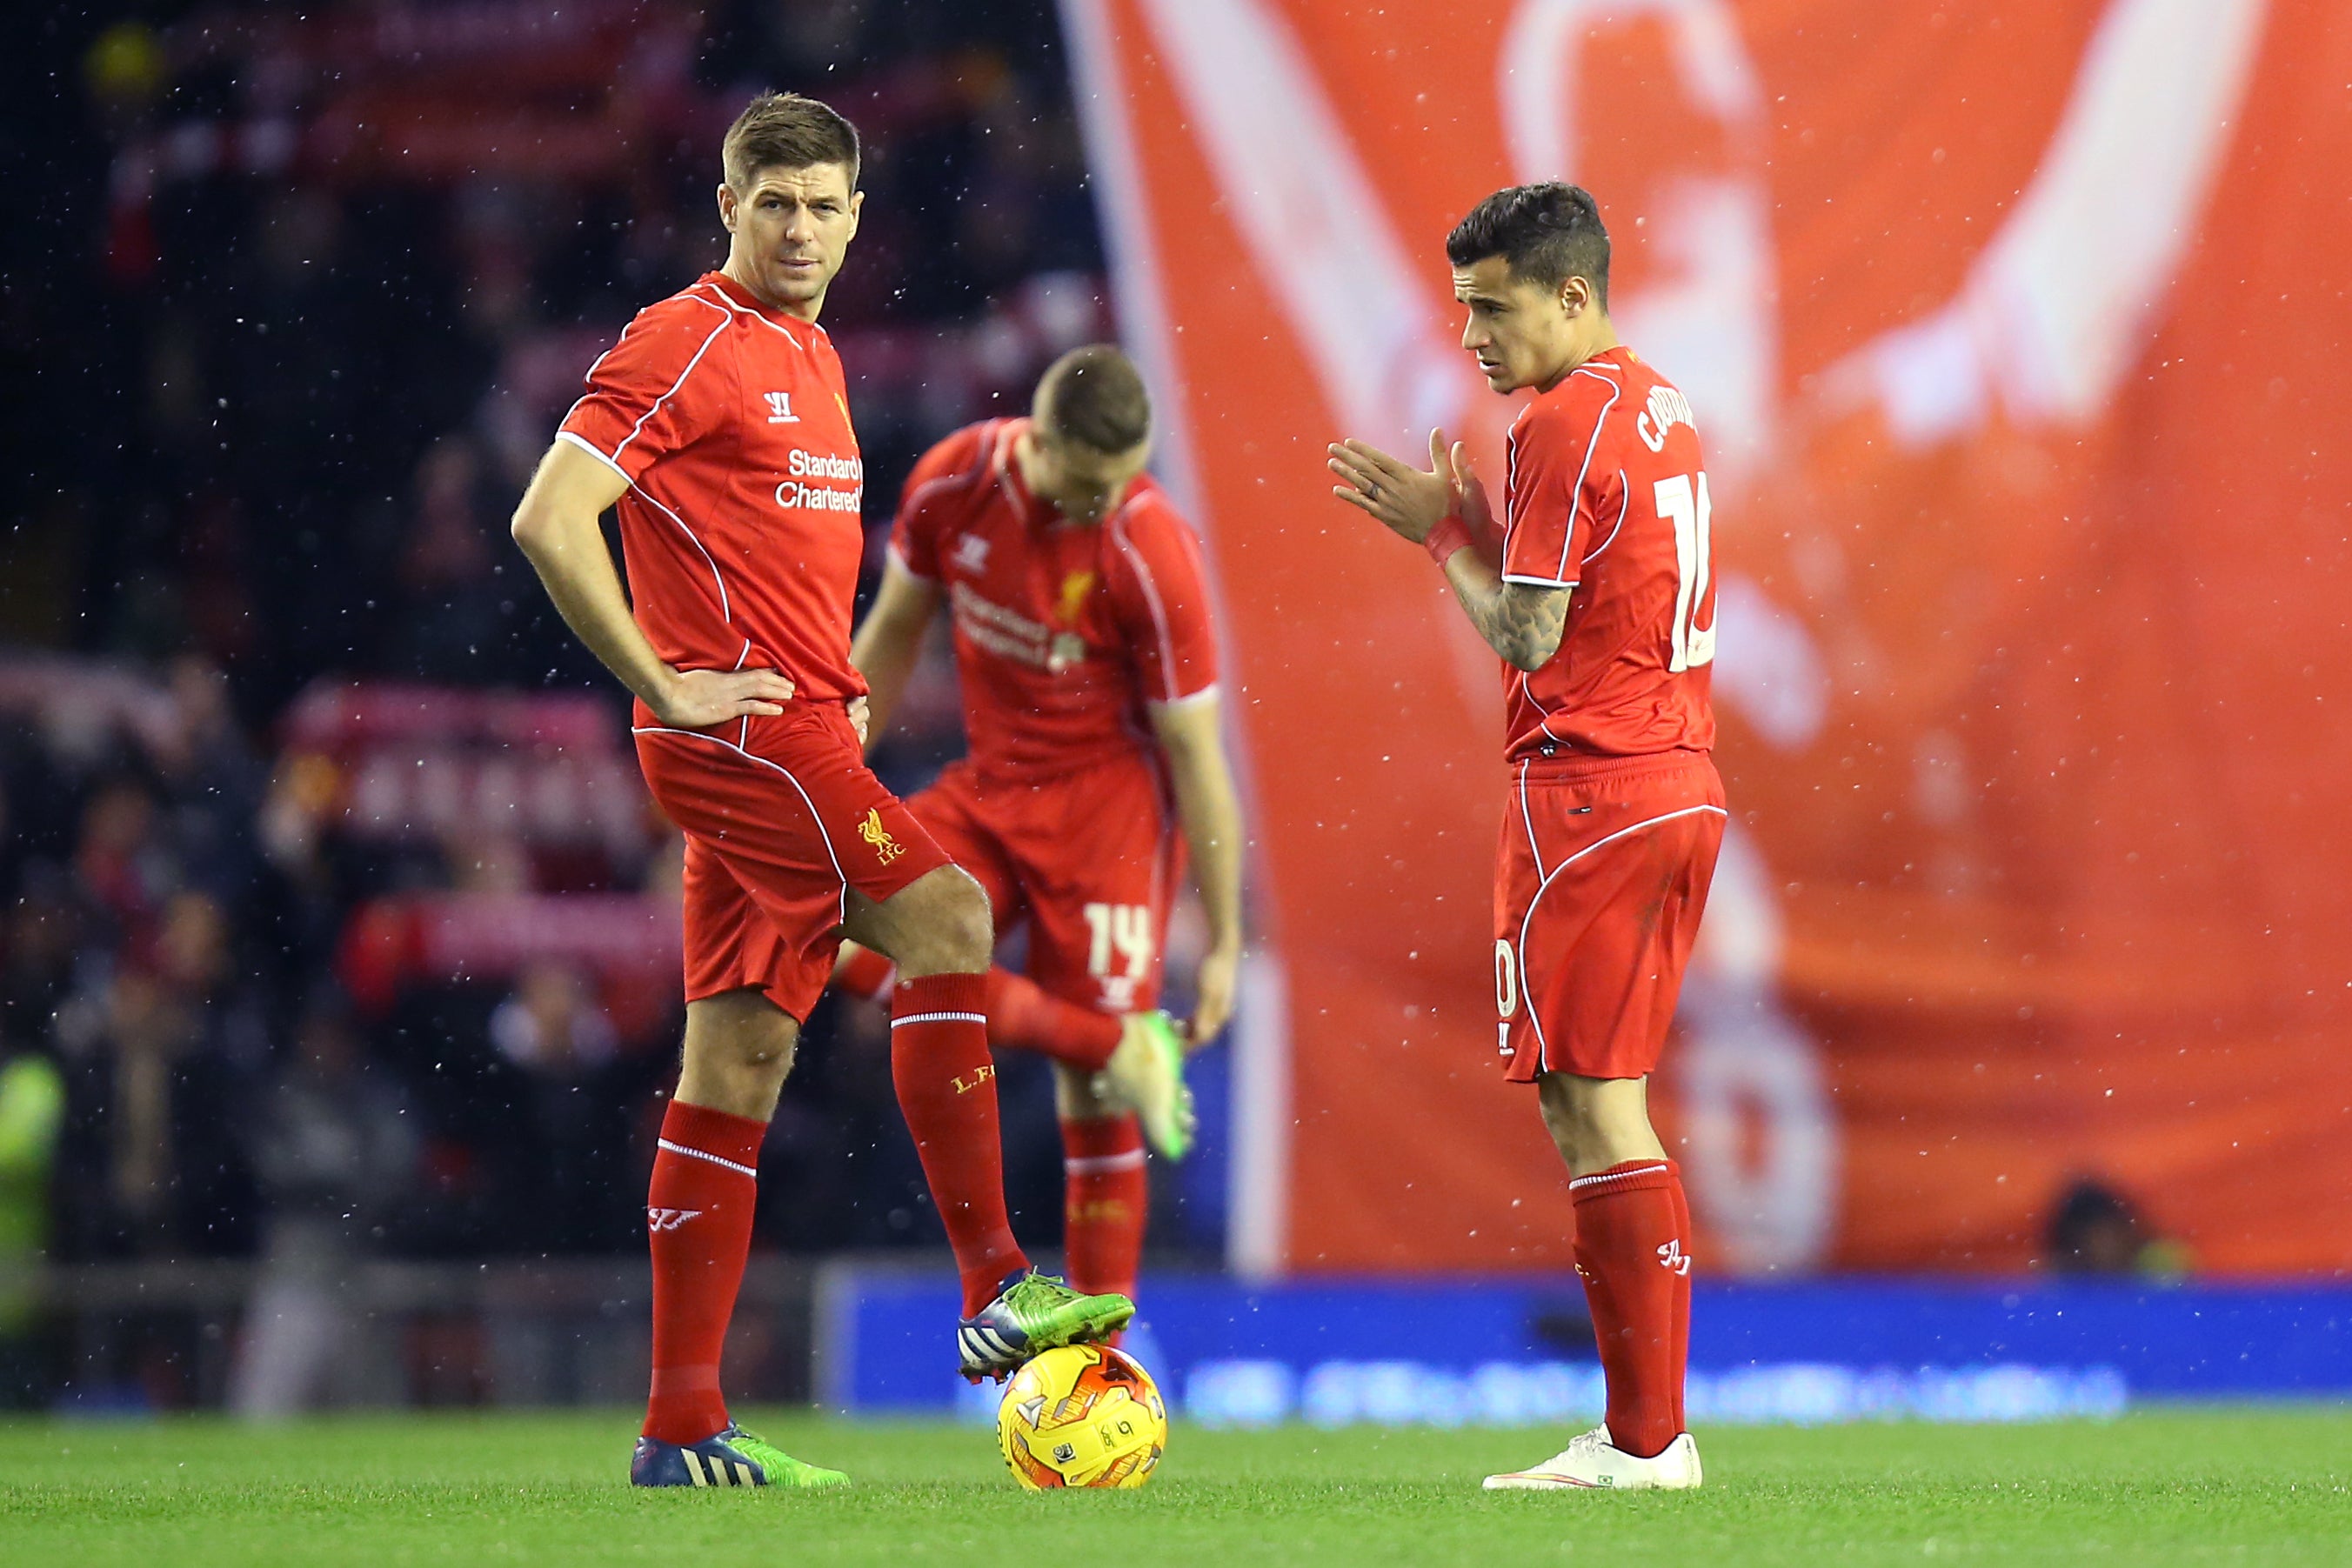 Steven Gerrard and Philippe Coutinho played with each other at Liverpool to great effect (Peter Byrne/PA)